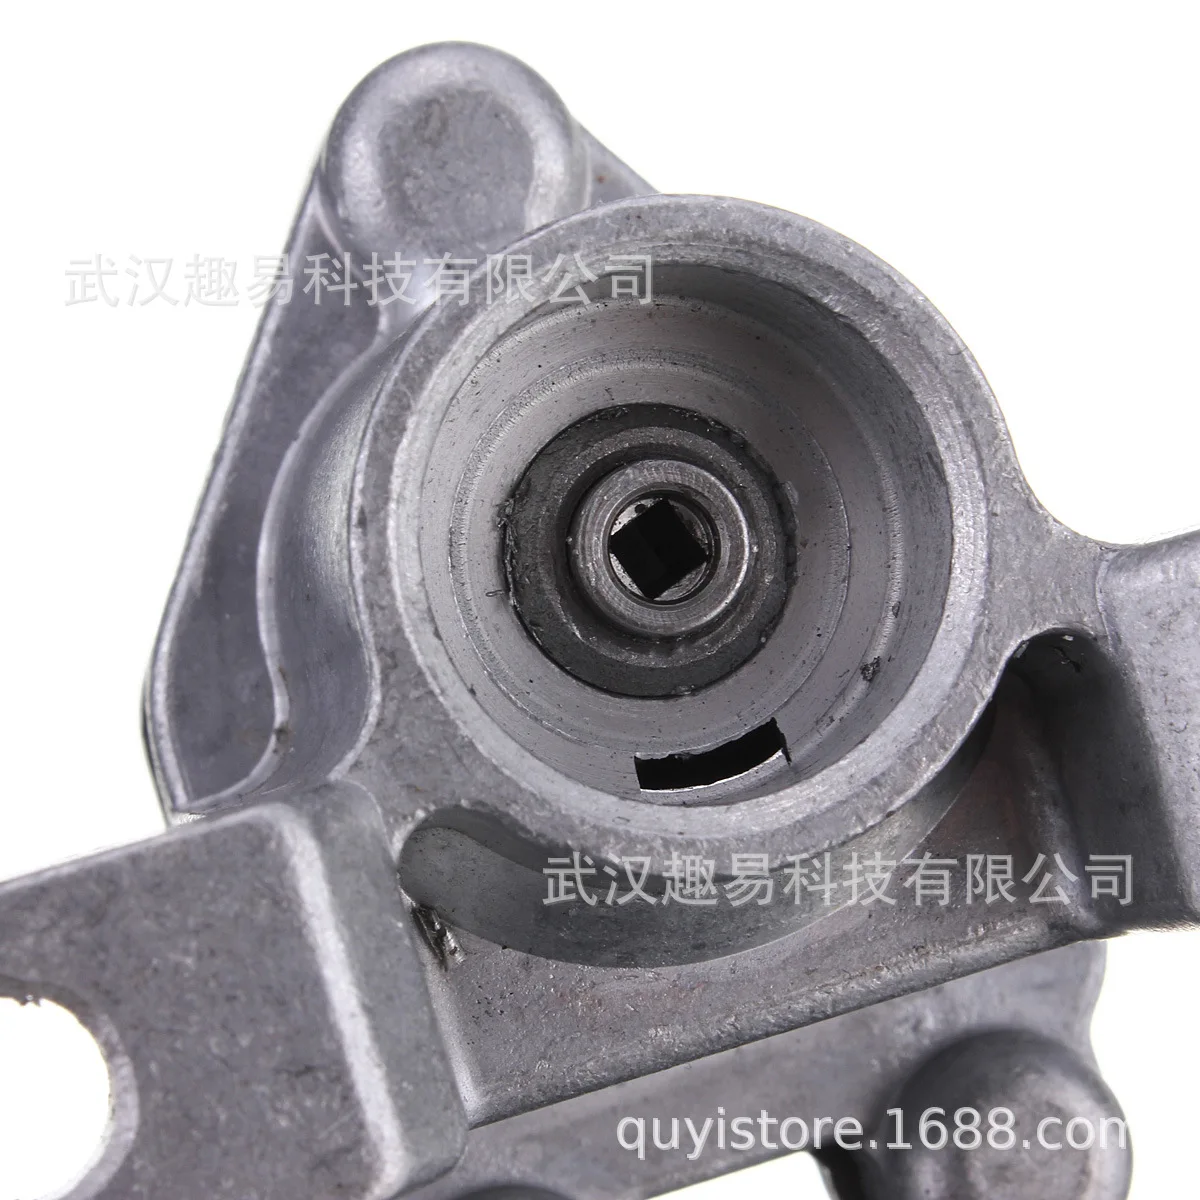 Suitable for honda ou ge Car Speed Sensor 92-2001-ABS Wheel Speed Sensor Stepped Frequency